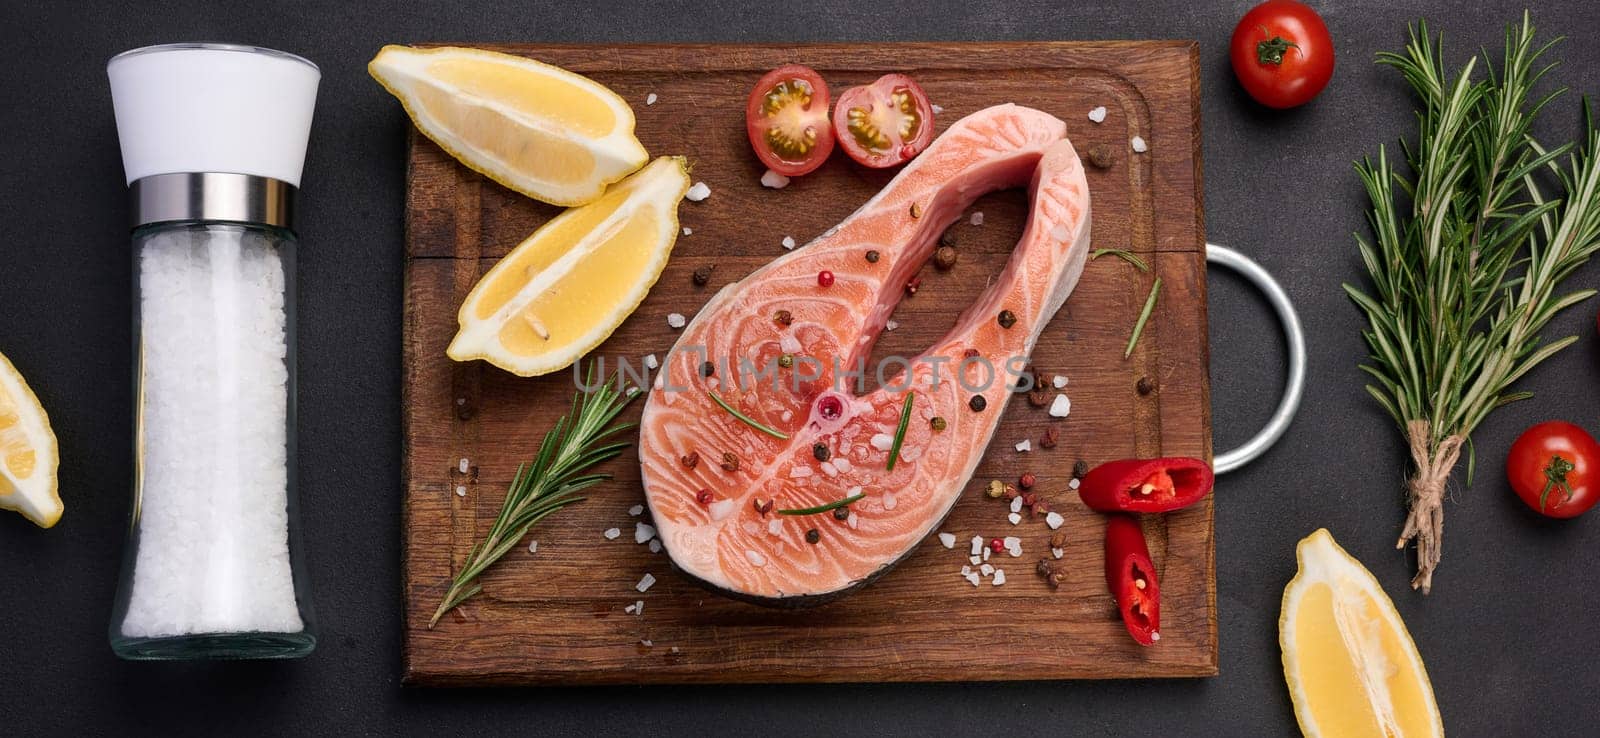 Raw salmon steak on a wooden cutting board, lemon slices, spices. Top view on black table